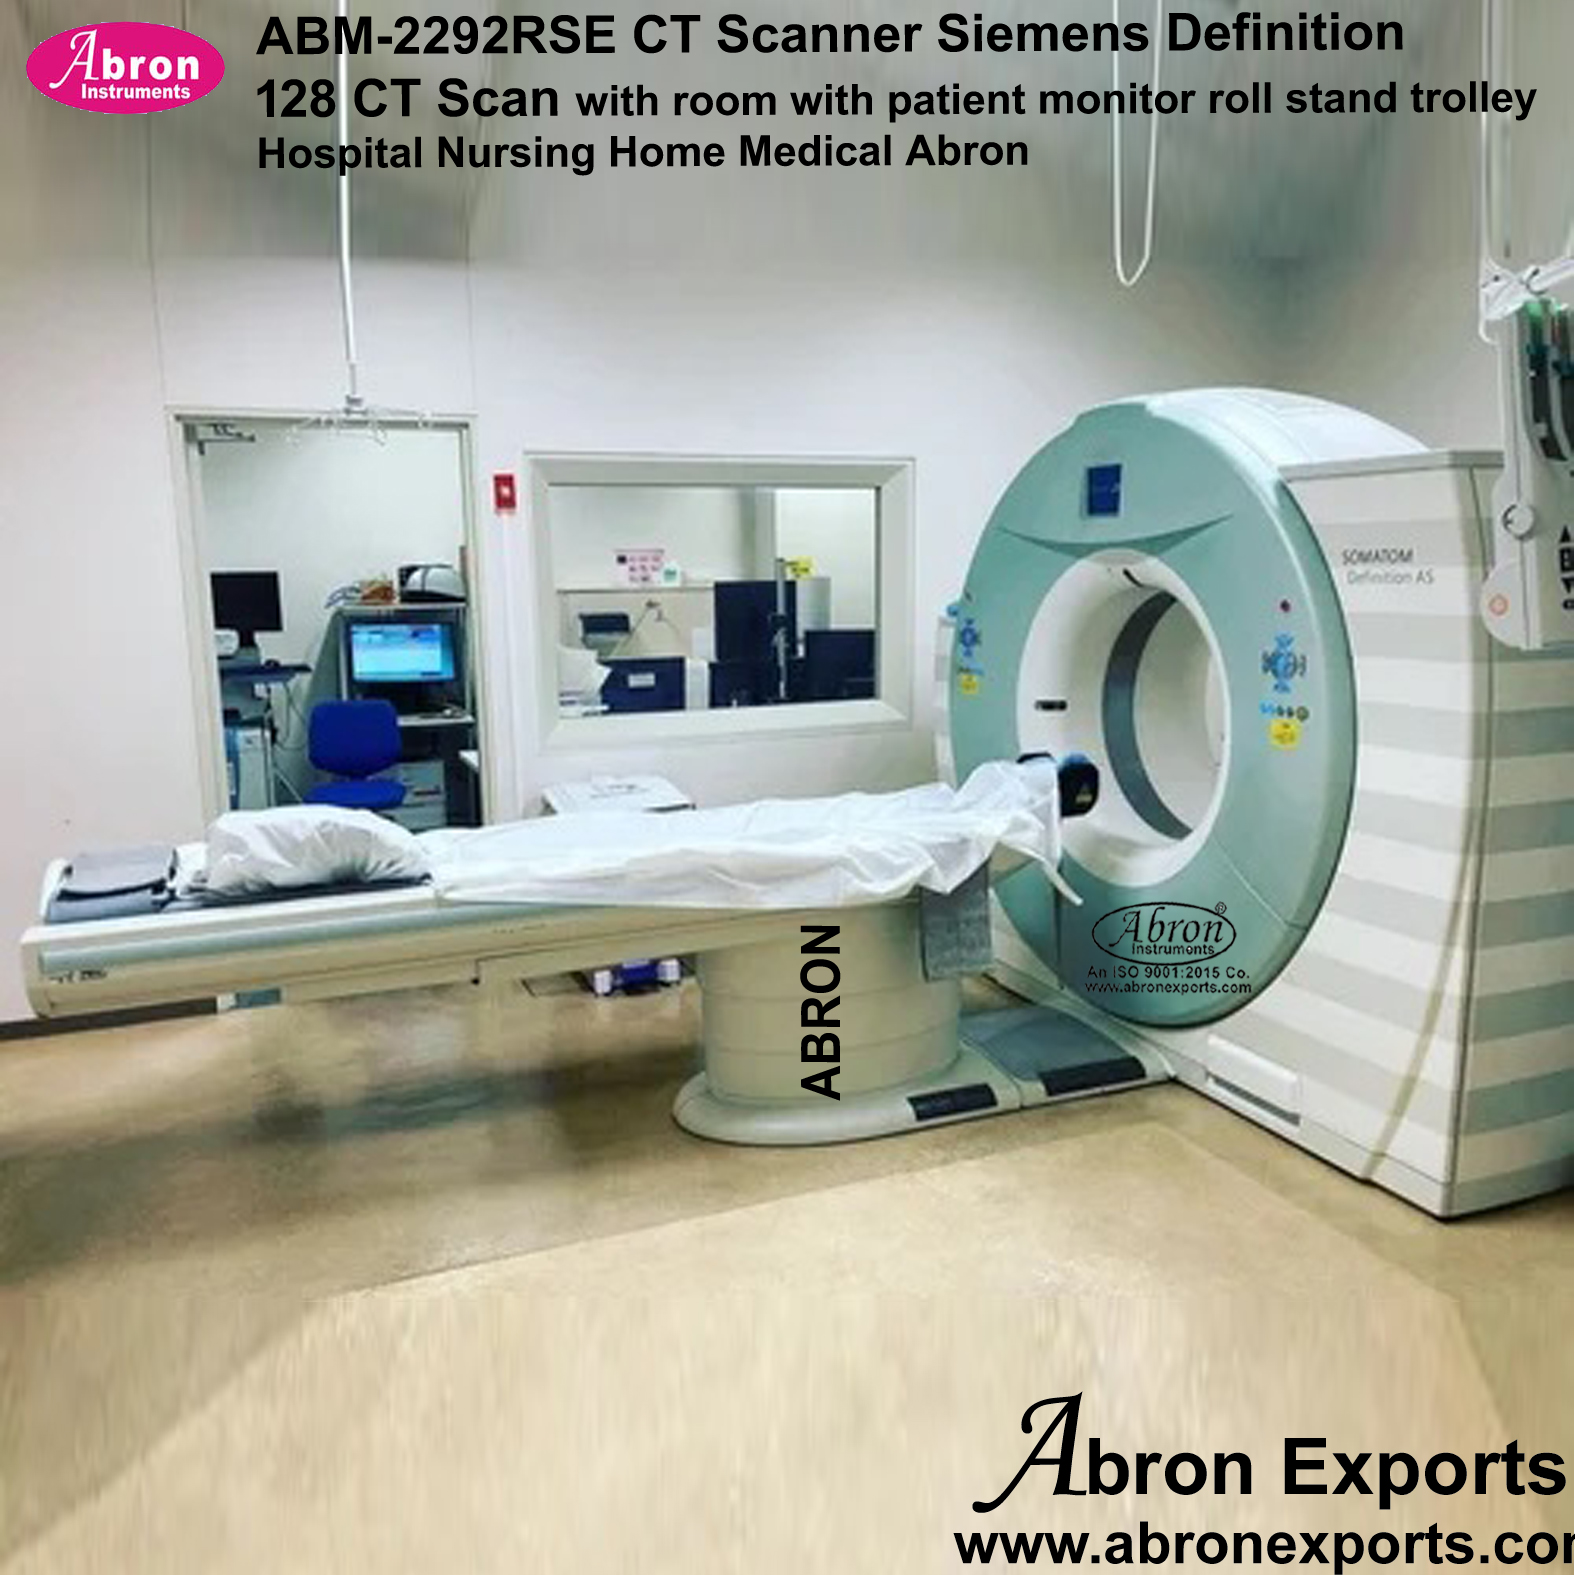 CT scanner siemens definition 128-ct-scan with room with patient monitor roll stand trolley Hospital Nursing Home Medical Abron ABM-2292RSE